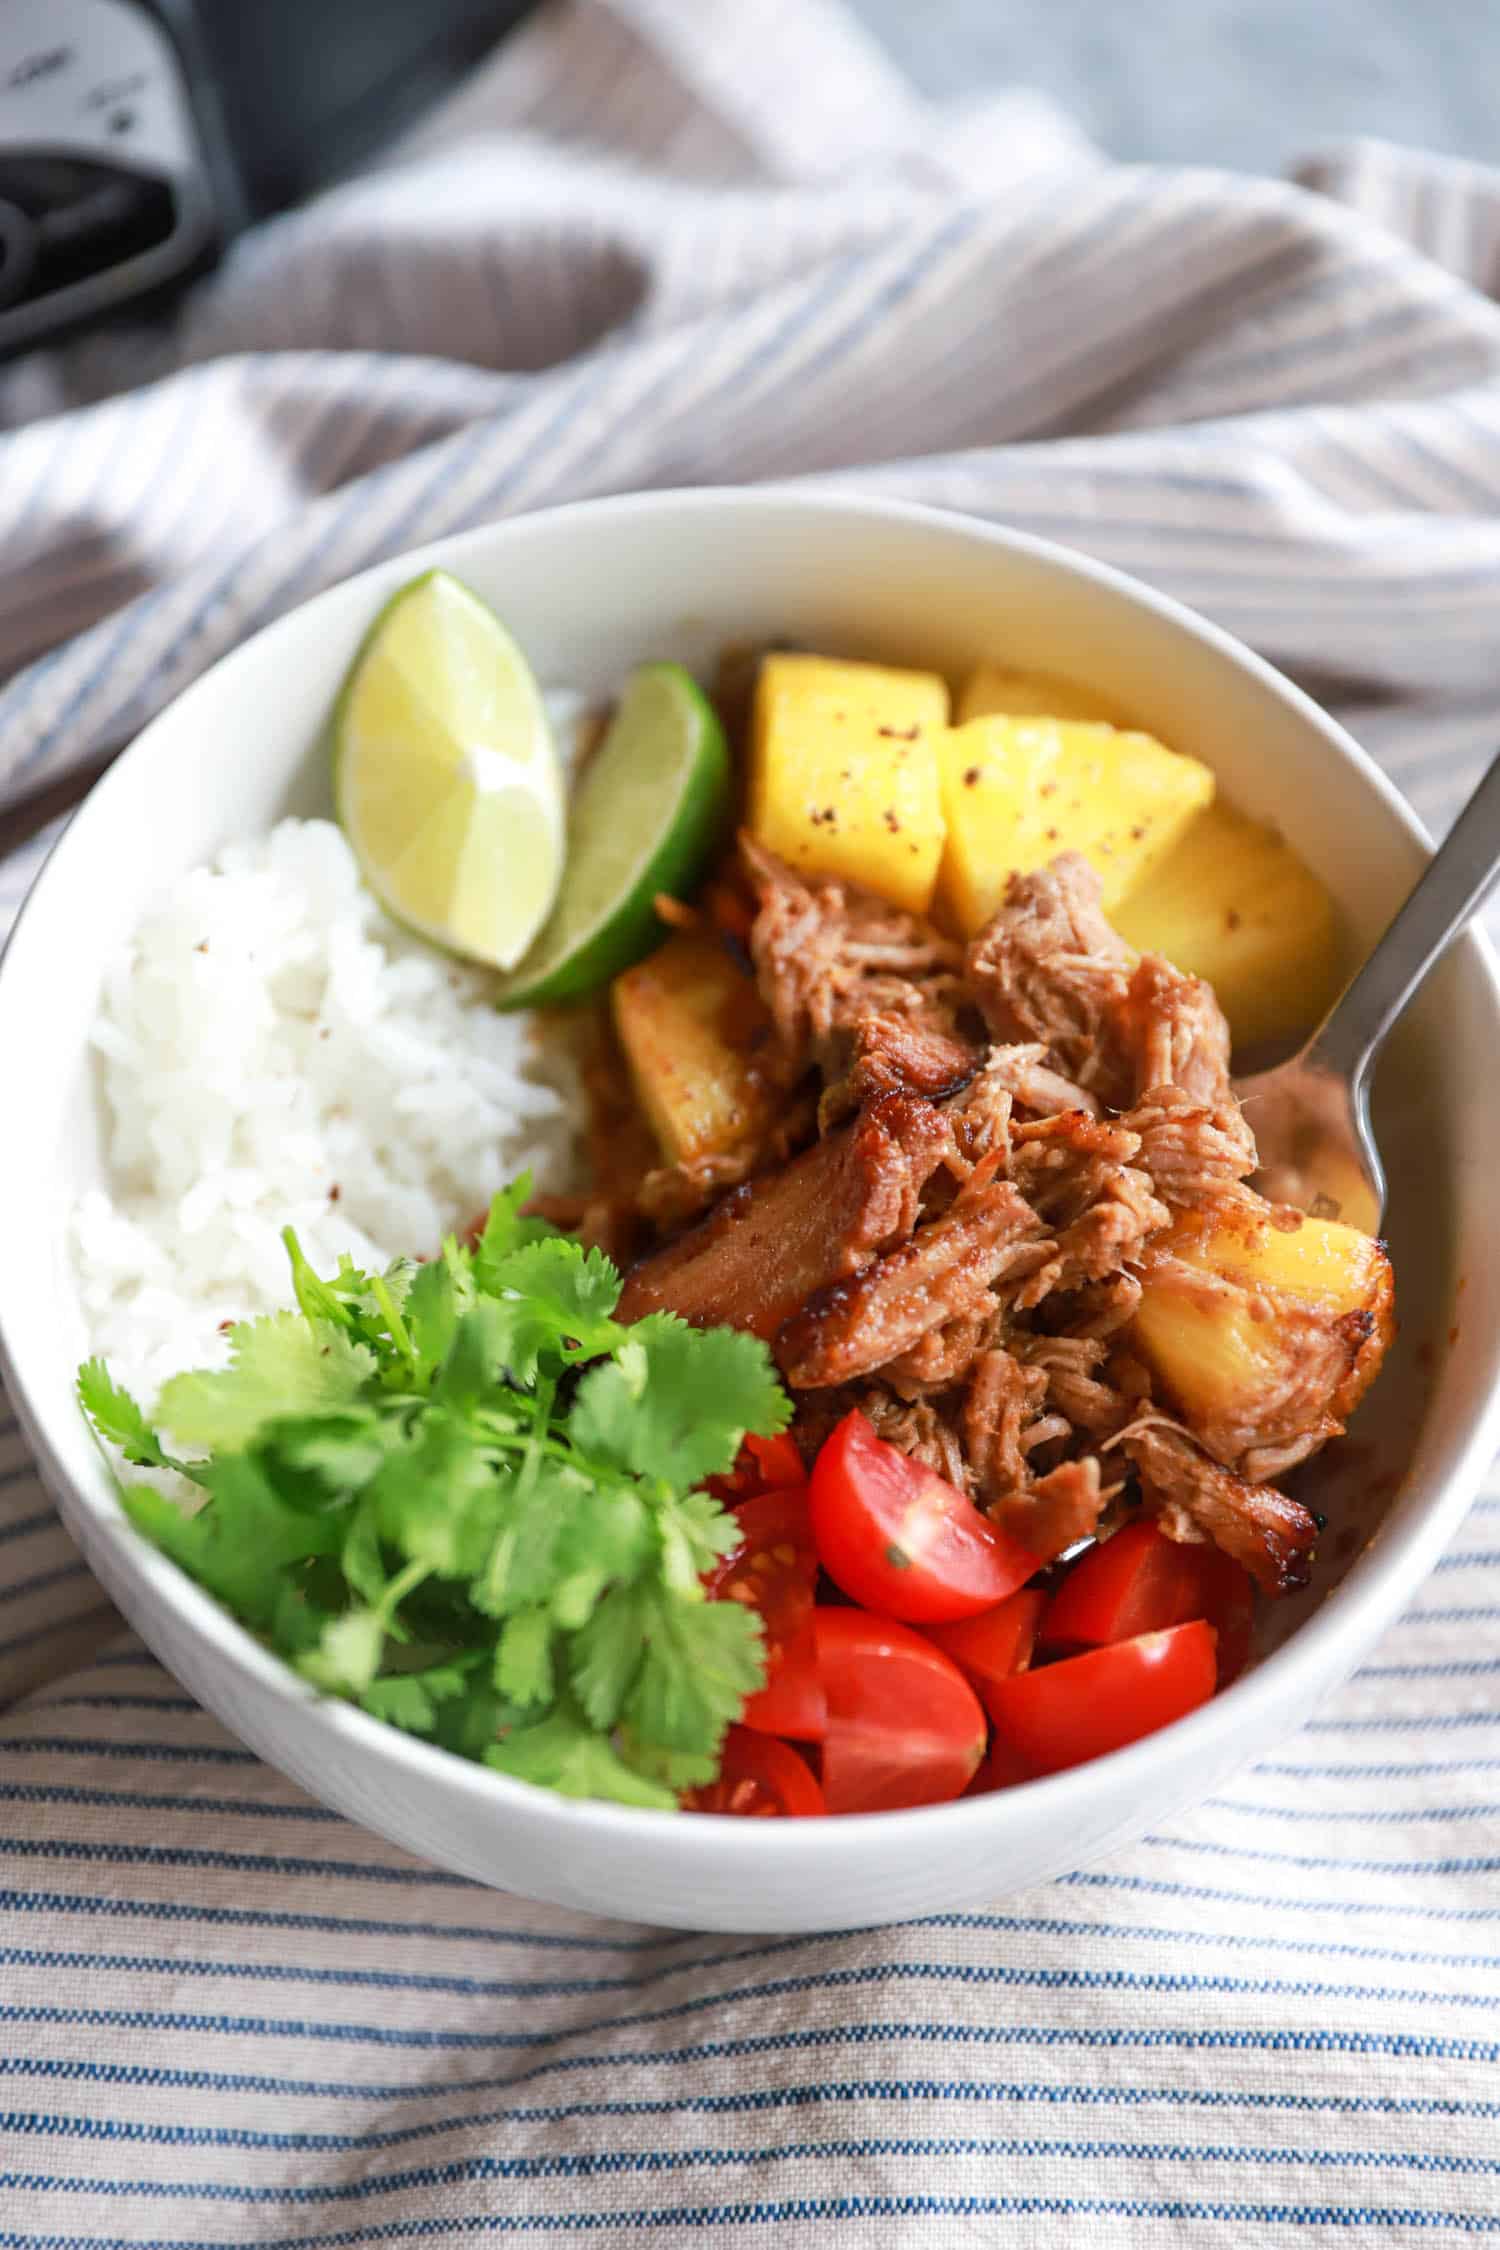 Bowl of al pastor with cilantro, tomatoes, and pineapple chunks arranged over white rice.